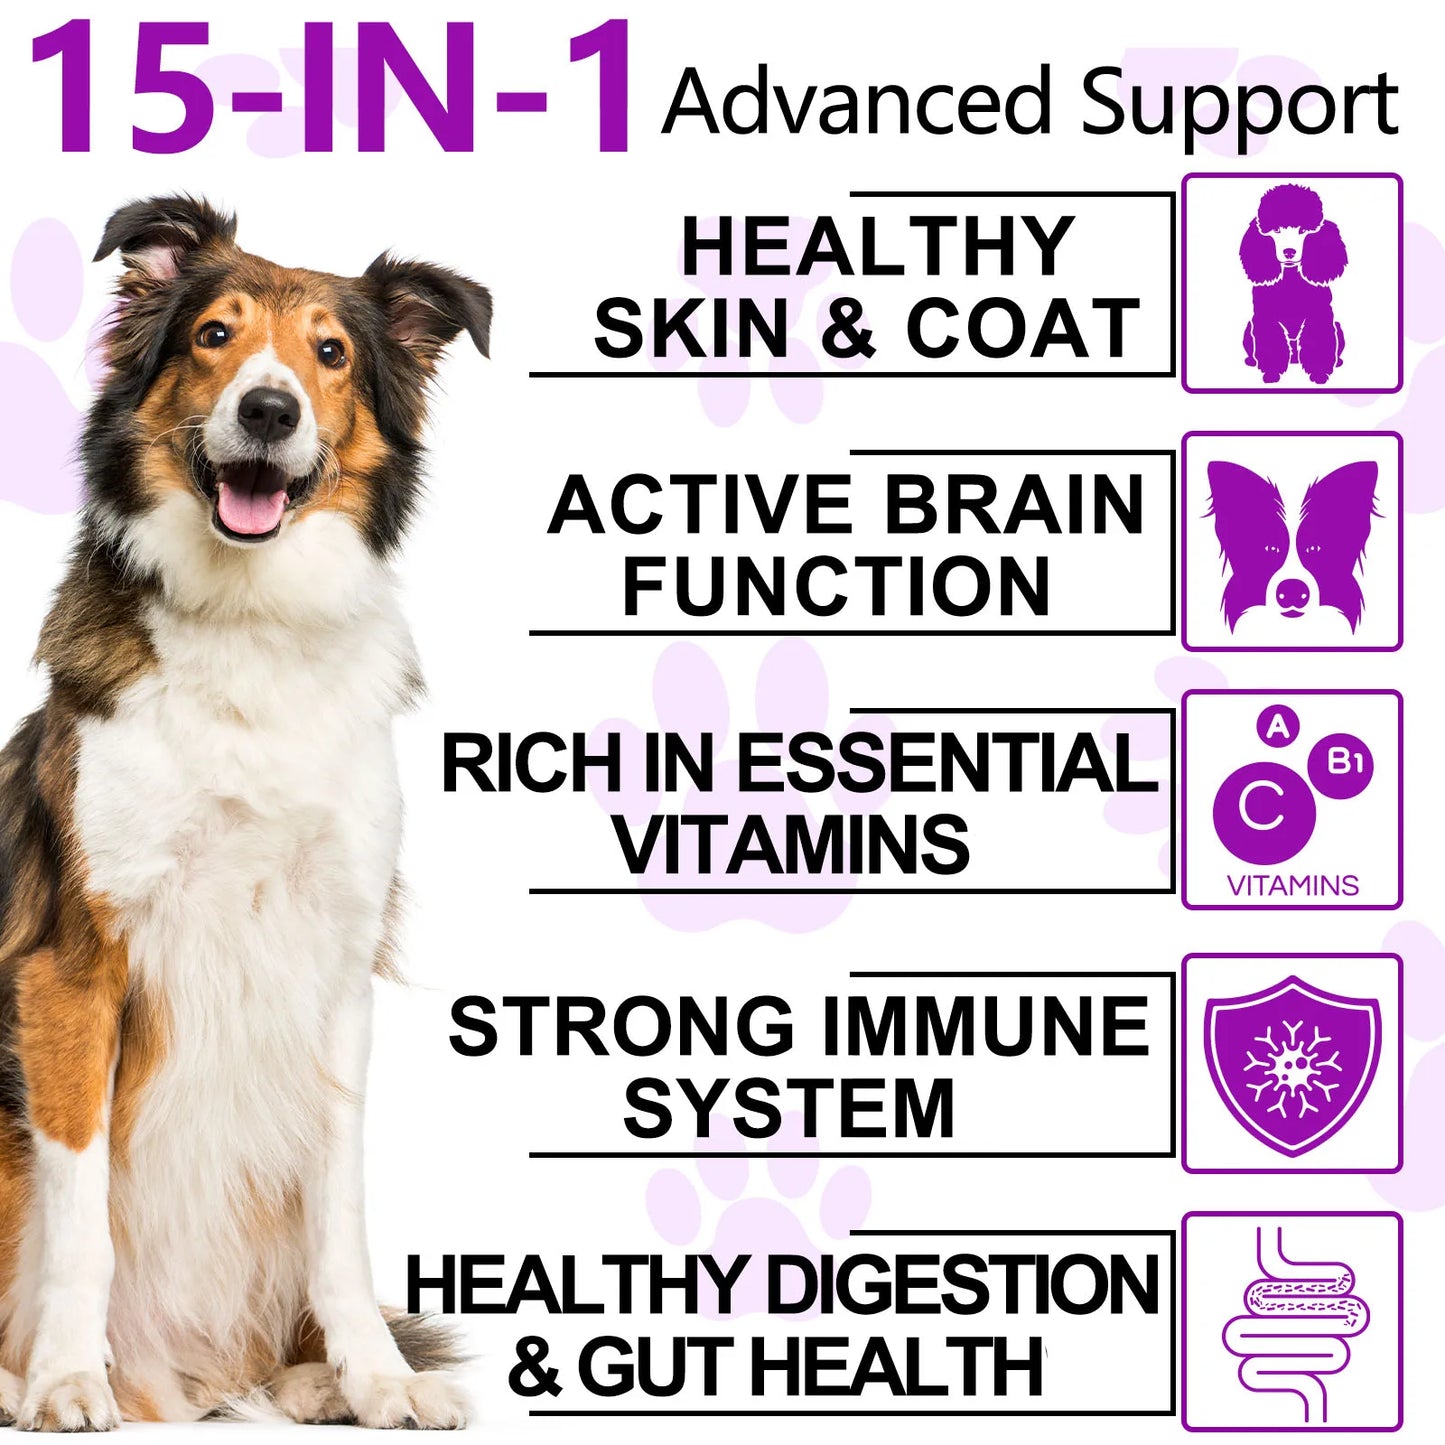 15 in 1 Dog Multivitamin Supplements dog food treats snacks, Immunity, Digestion, Joint and Heart Health Support  150 SOFT CHEWS